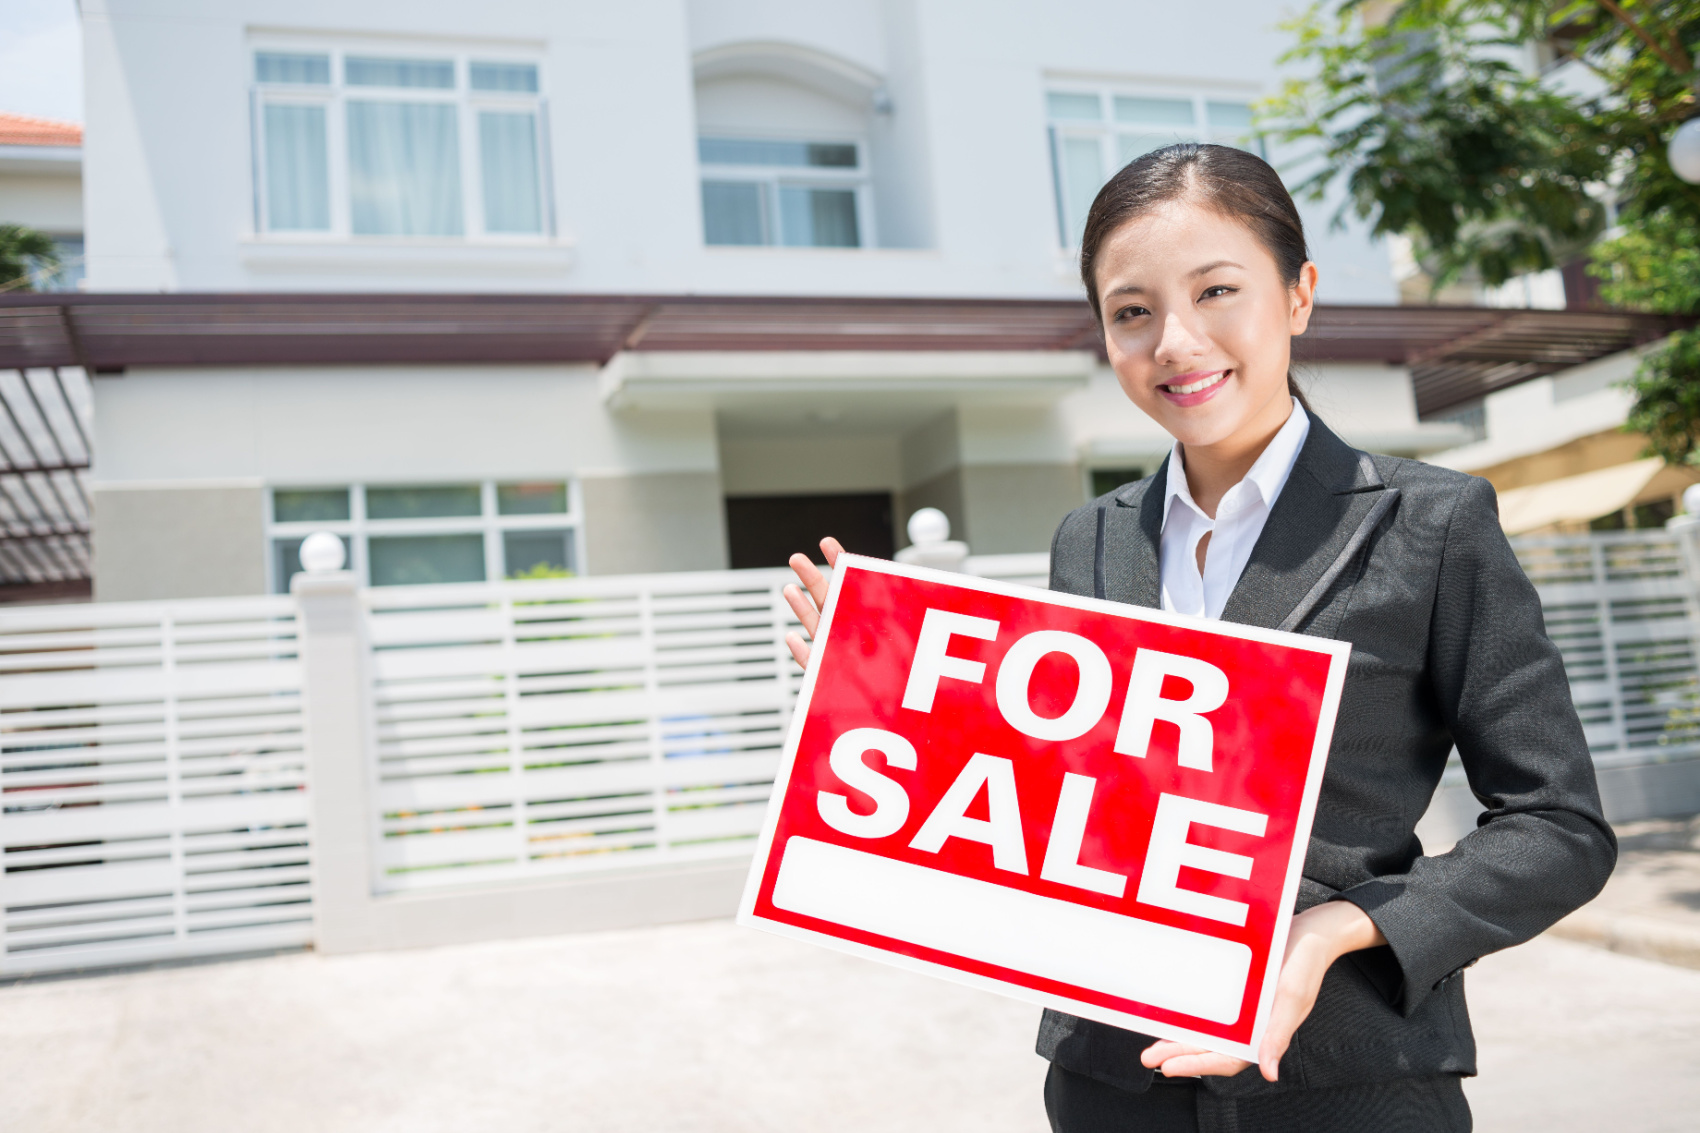 Female real estate worker holding a "For Sale" sign in front of a vacant real estate property.